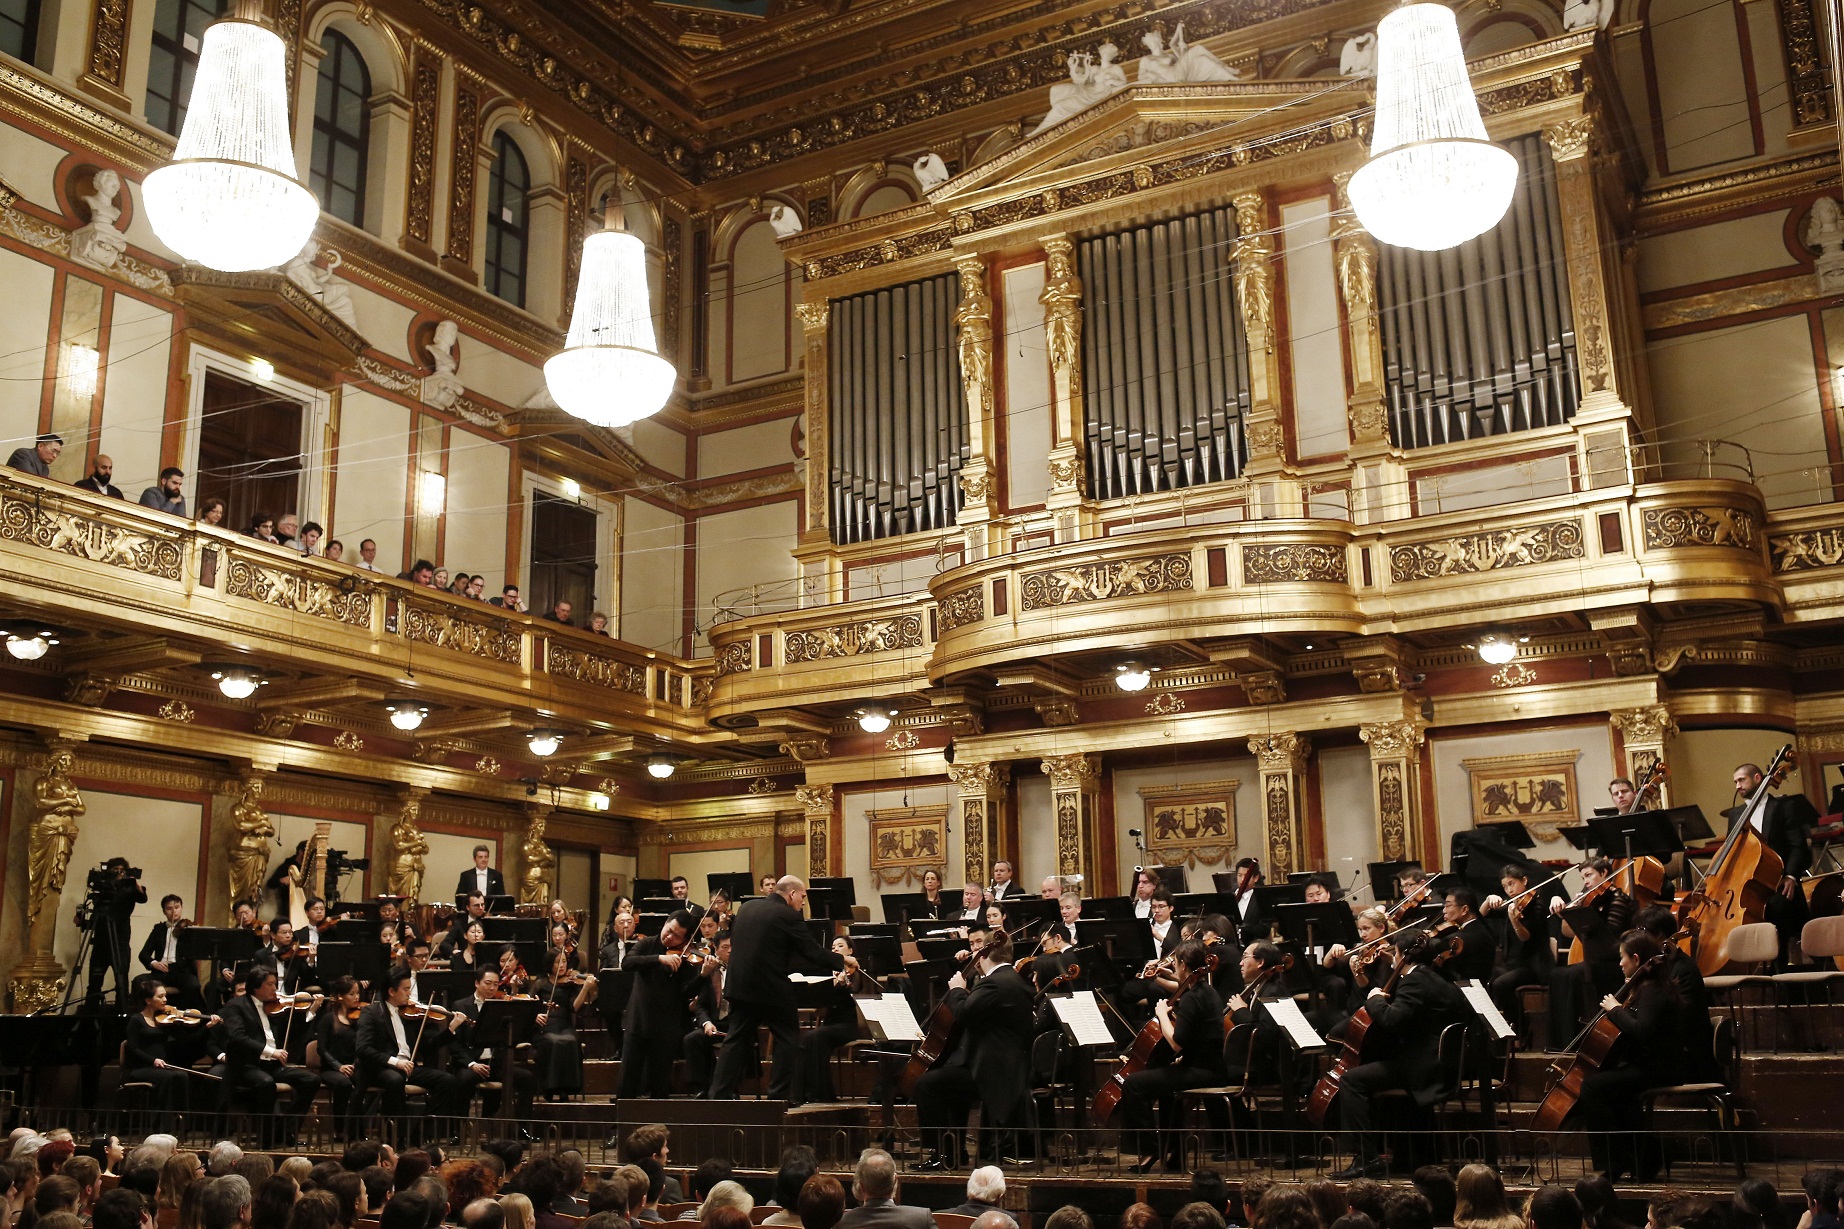 HK Phil playing in Vienna’s Musikverein, arguably Europe’s most prestigious concert hall (led by music director Jaap van Zweden, with renowned violinist Ning Feng (Photo Credit: Dieter Nagl) 